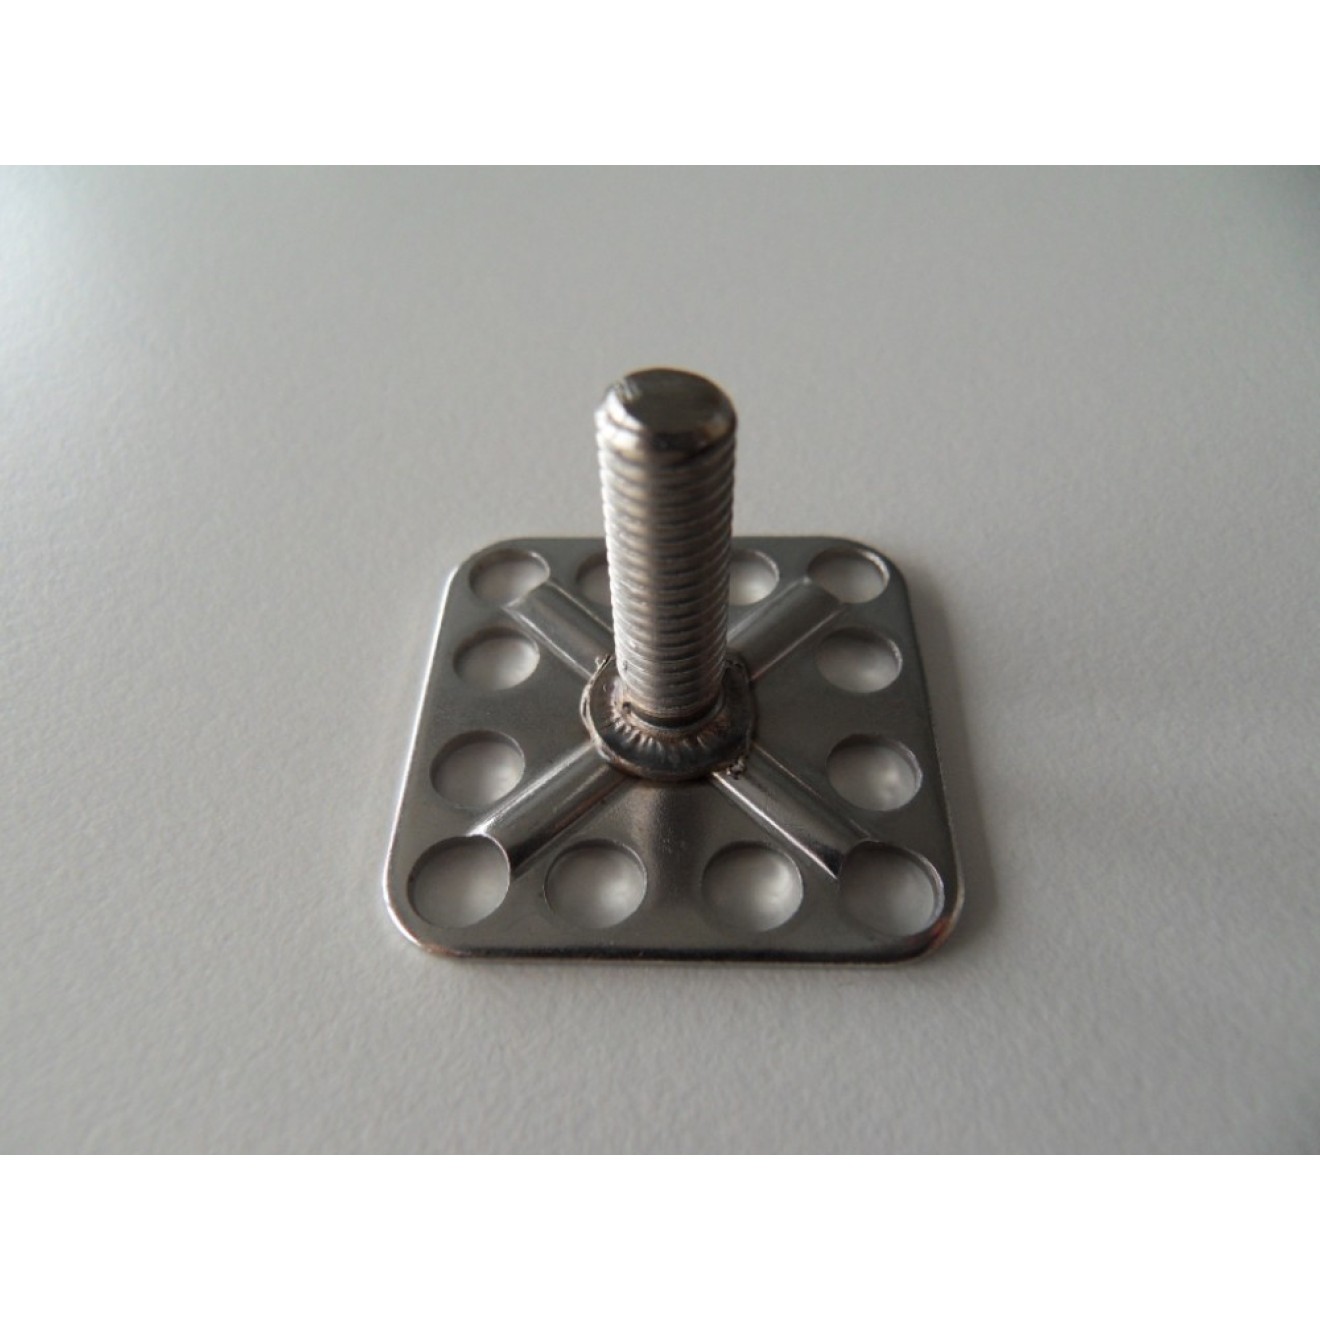 Stainless steel fasteners, male threaded stud M6x25, base plate 30x30mm